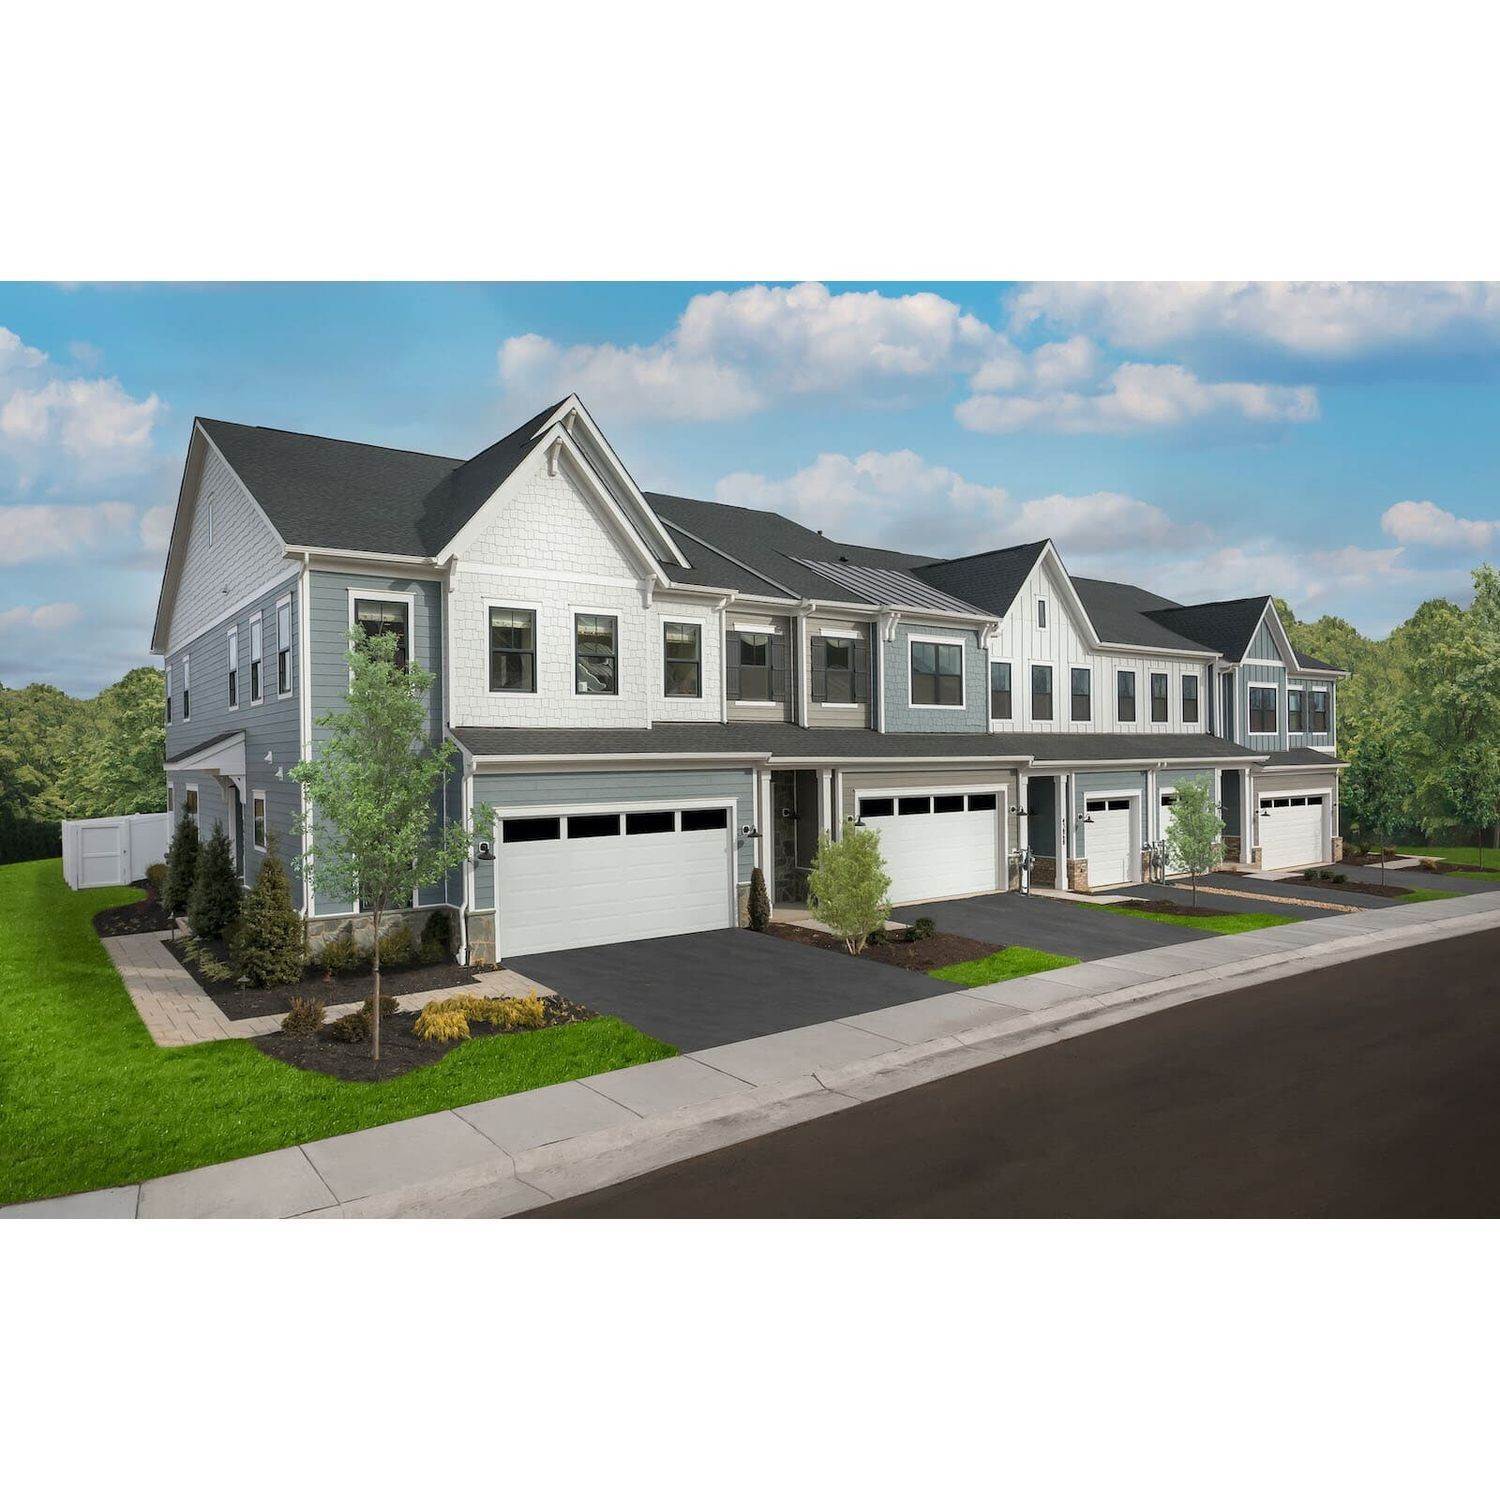 Townhouse for Sale at 55+ Villas Collection At The Crest At Linton Hall Now Selling From Cadence At Lansdowne, Bristow, VA 20136